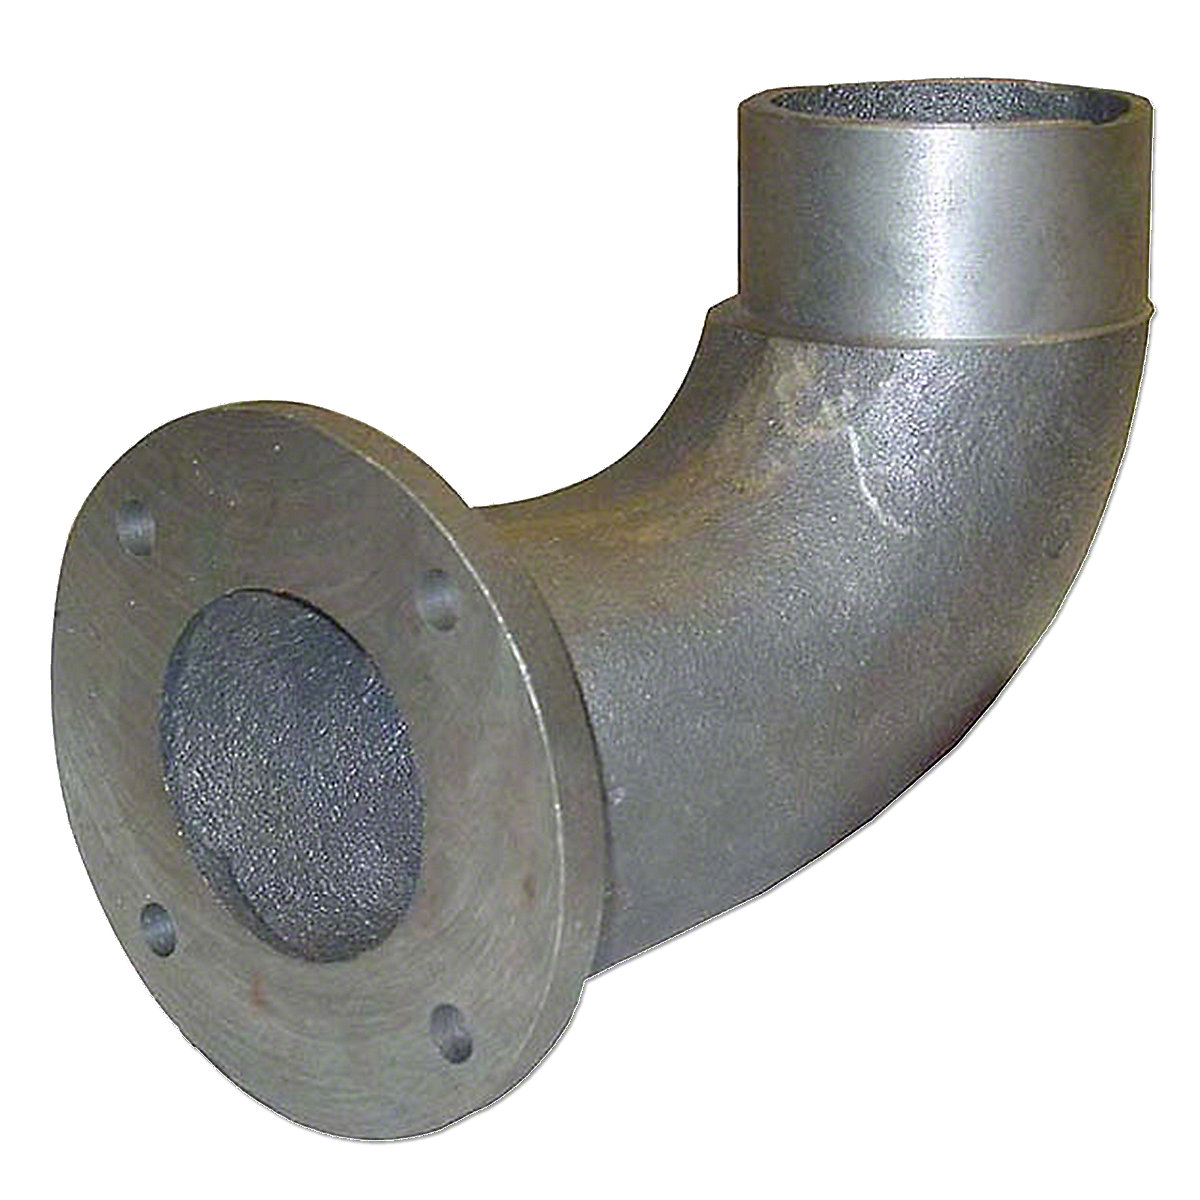 Turbo Elbow For Allis Chalmers: 190, 200